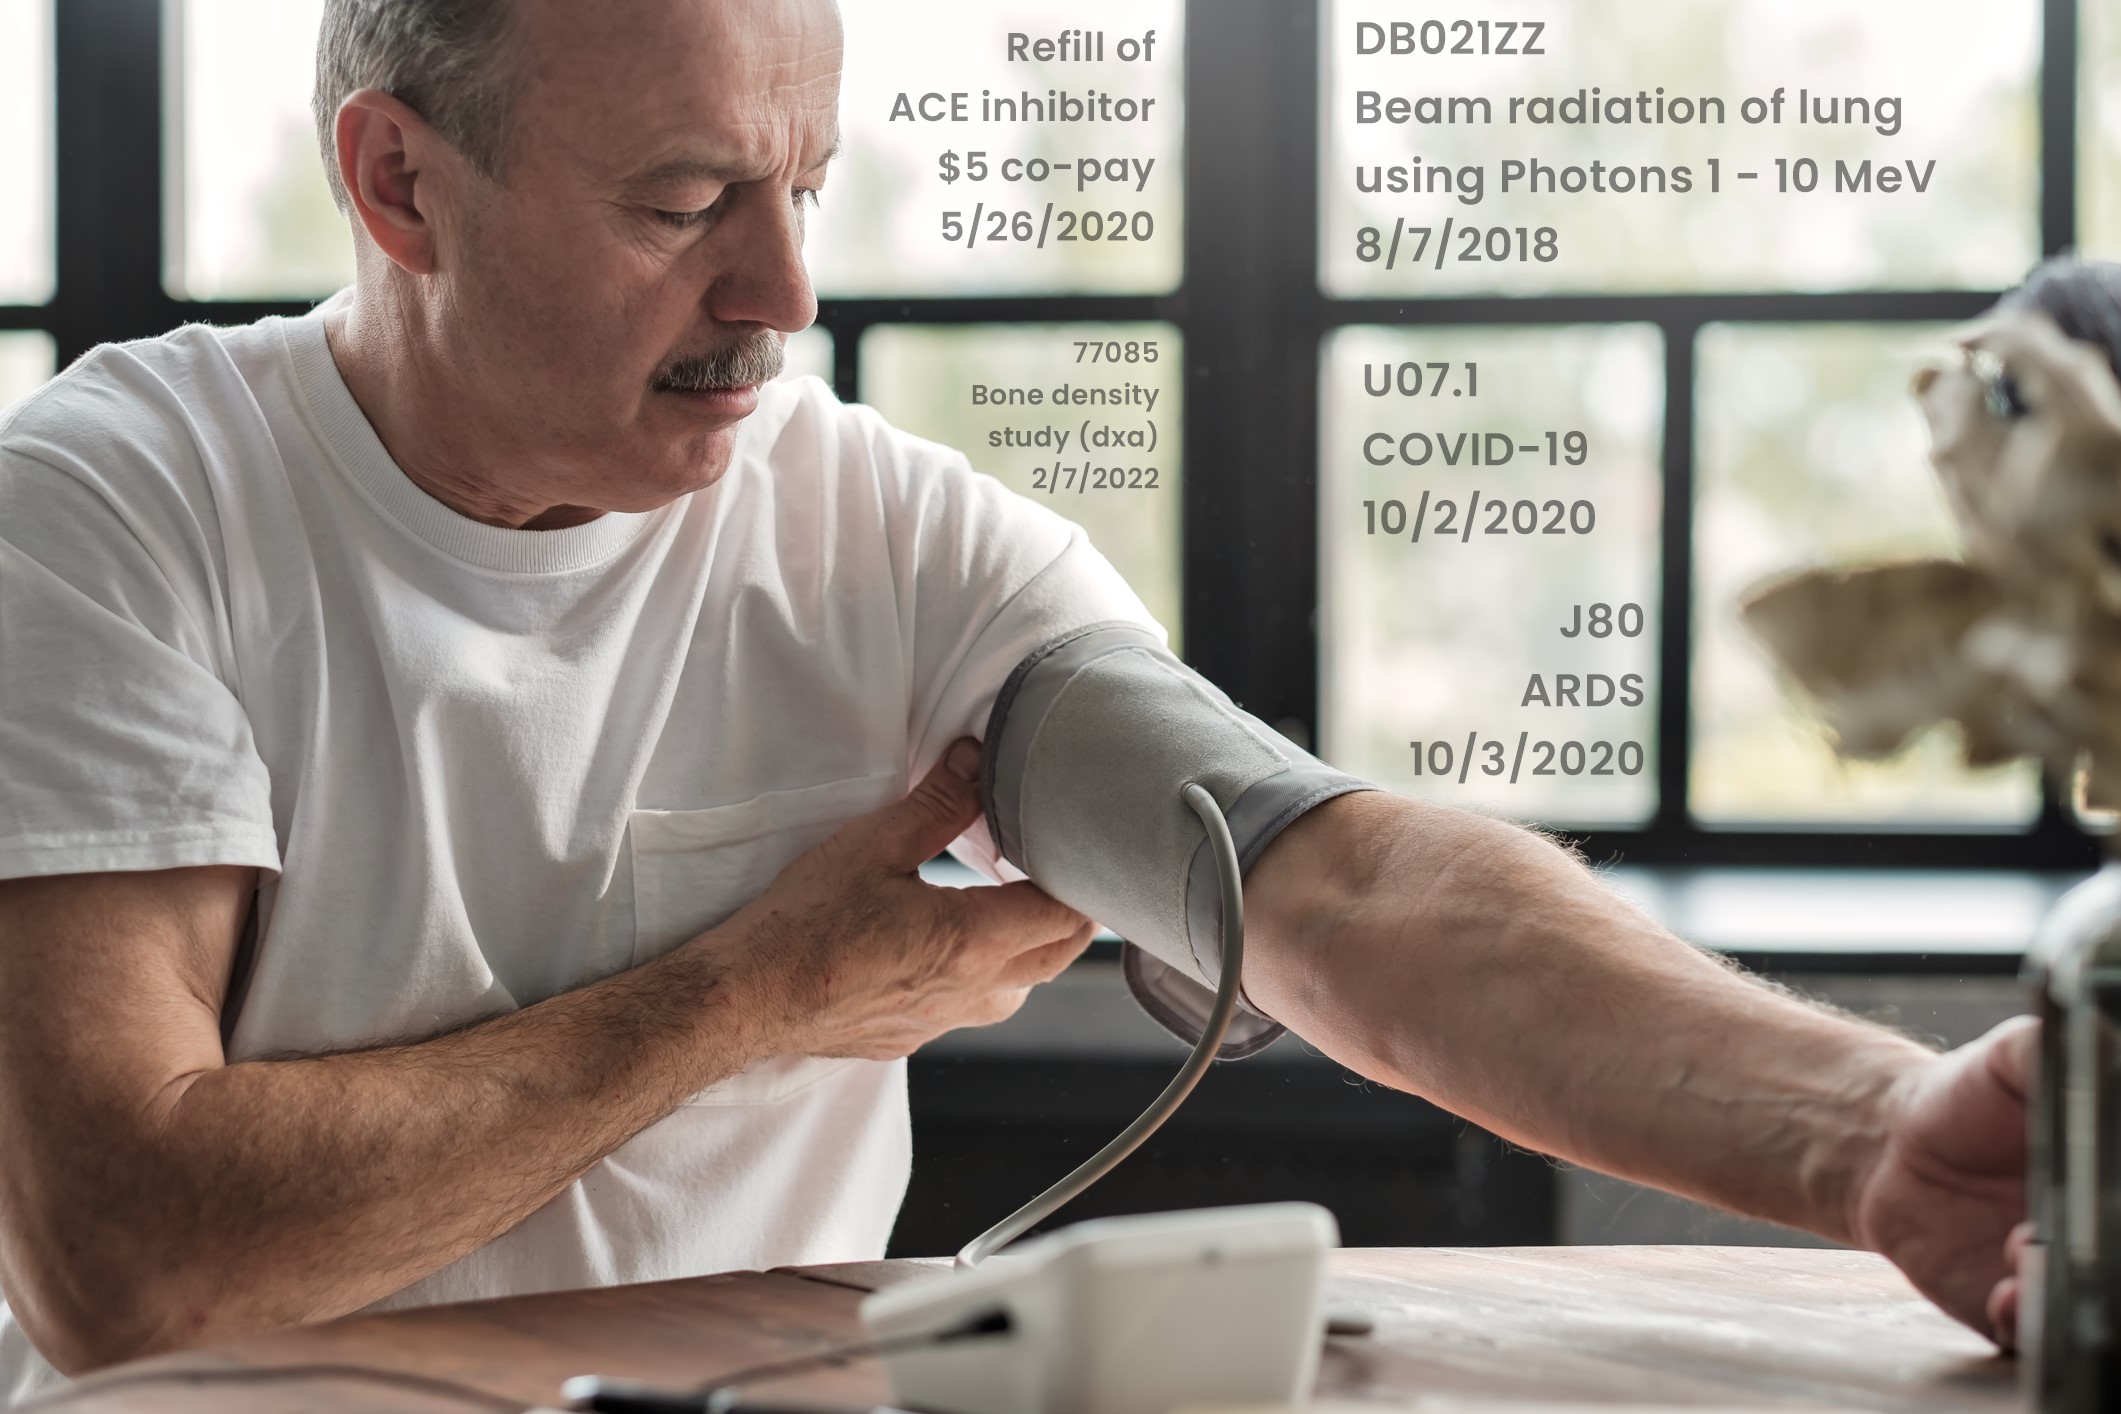 Hispanic male applying at-home blood pressure cuff; medical codes in background